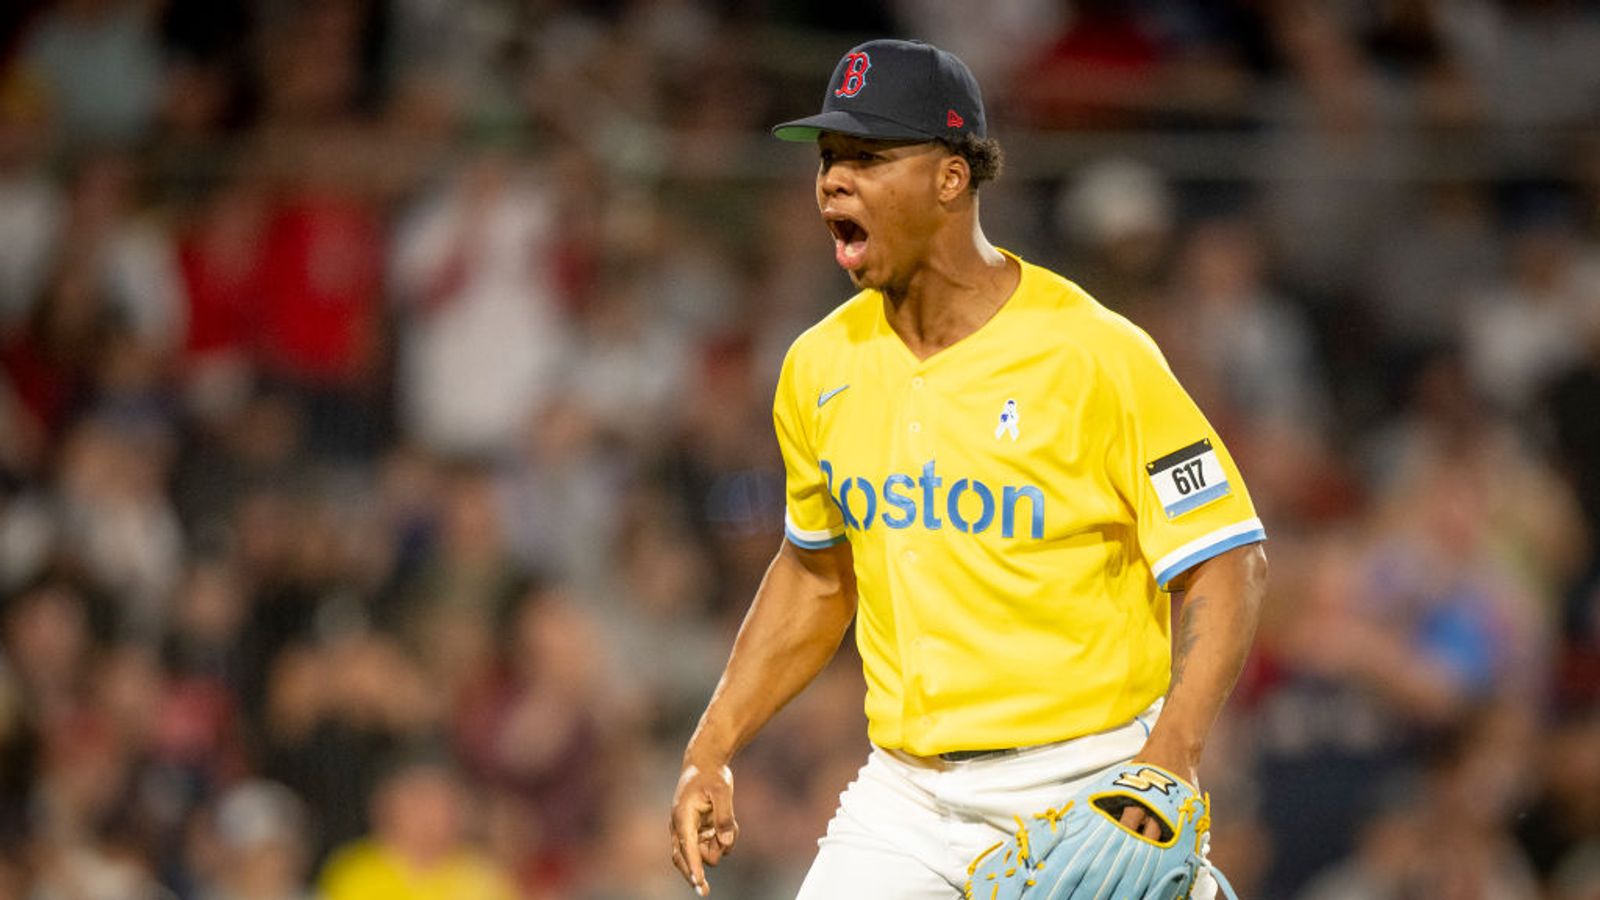 Yankees sweep Fenway Park doubleheader for first time since 2006